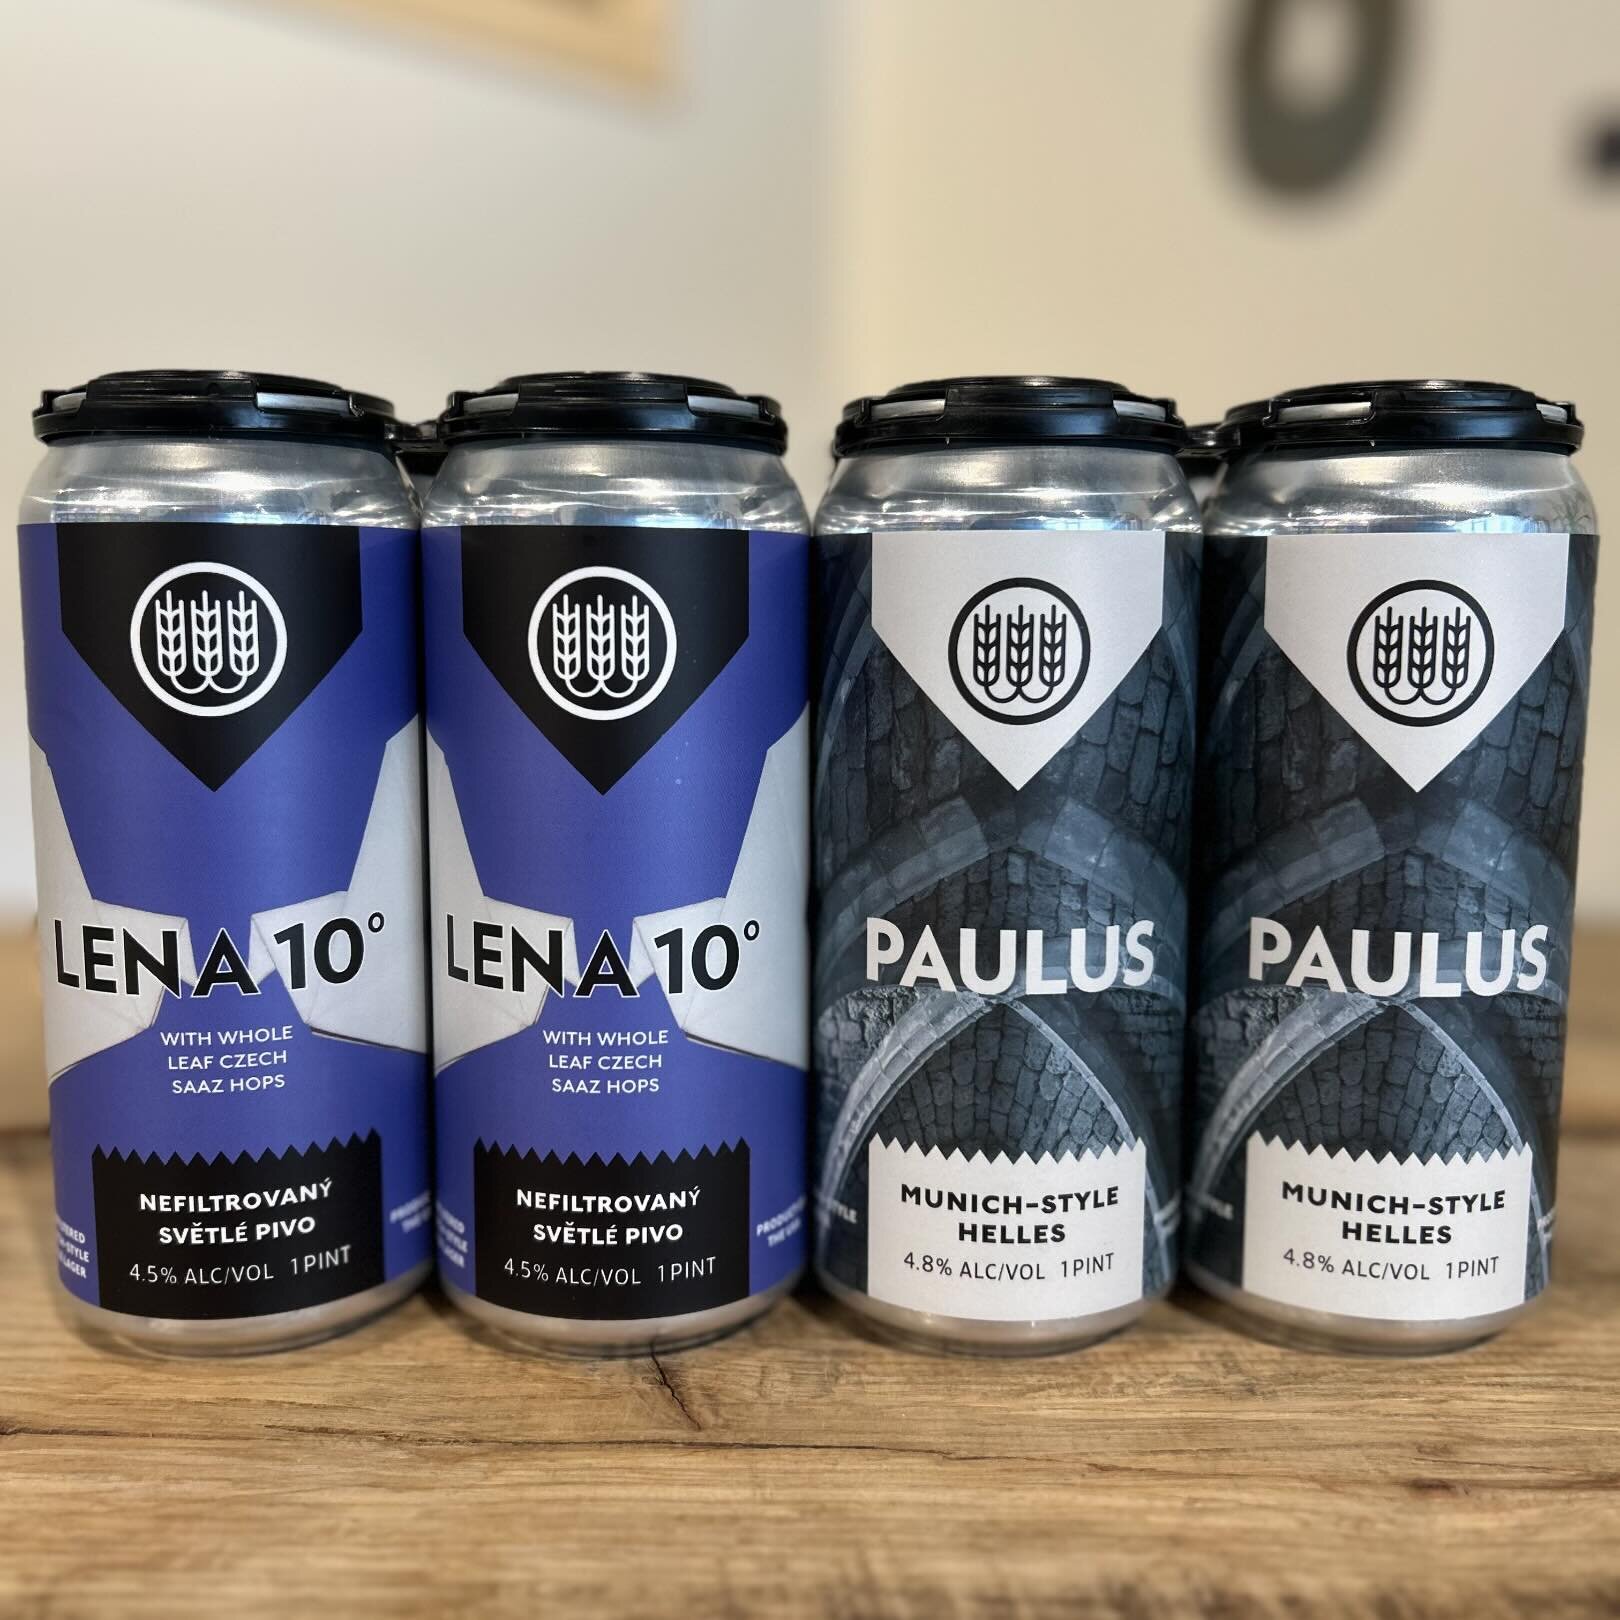 Freshie @schillingbeerco #NowAvailable #SudburyCraftBeer #DrinkLager
&mdash;
This edition of Lena 10&deg;, our Czech Pale Lager, explores the connection between traditional landrace barley varieties and modern malting. This led us to @sugarcreekmaltc